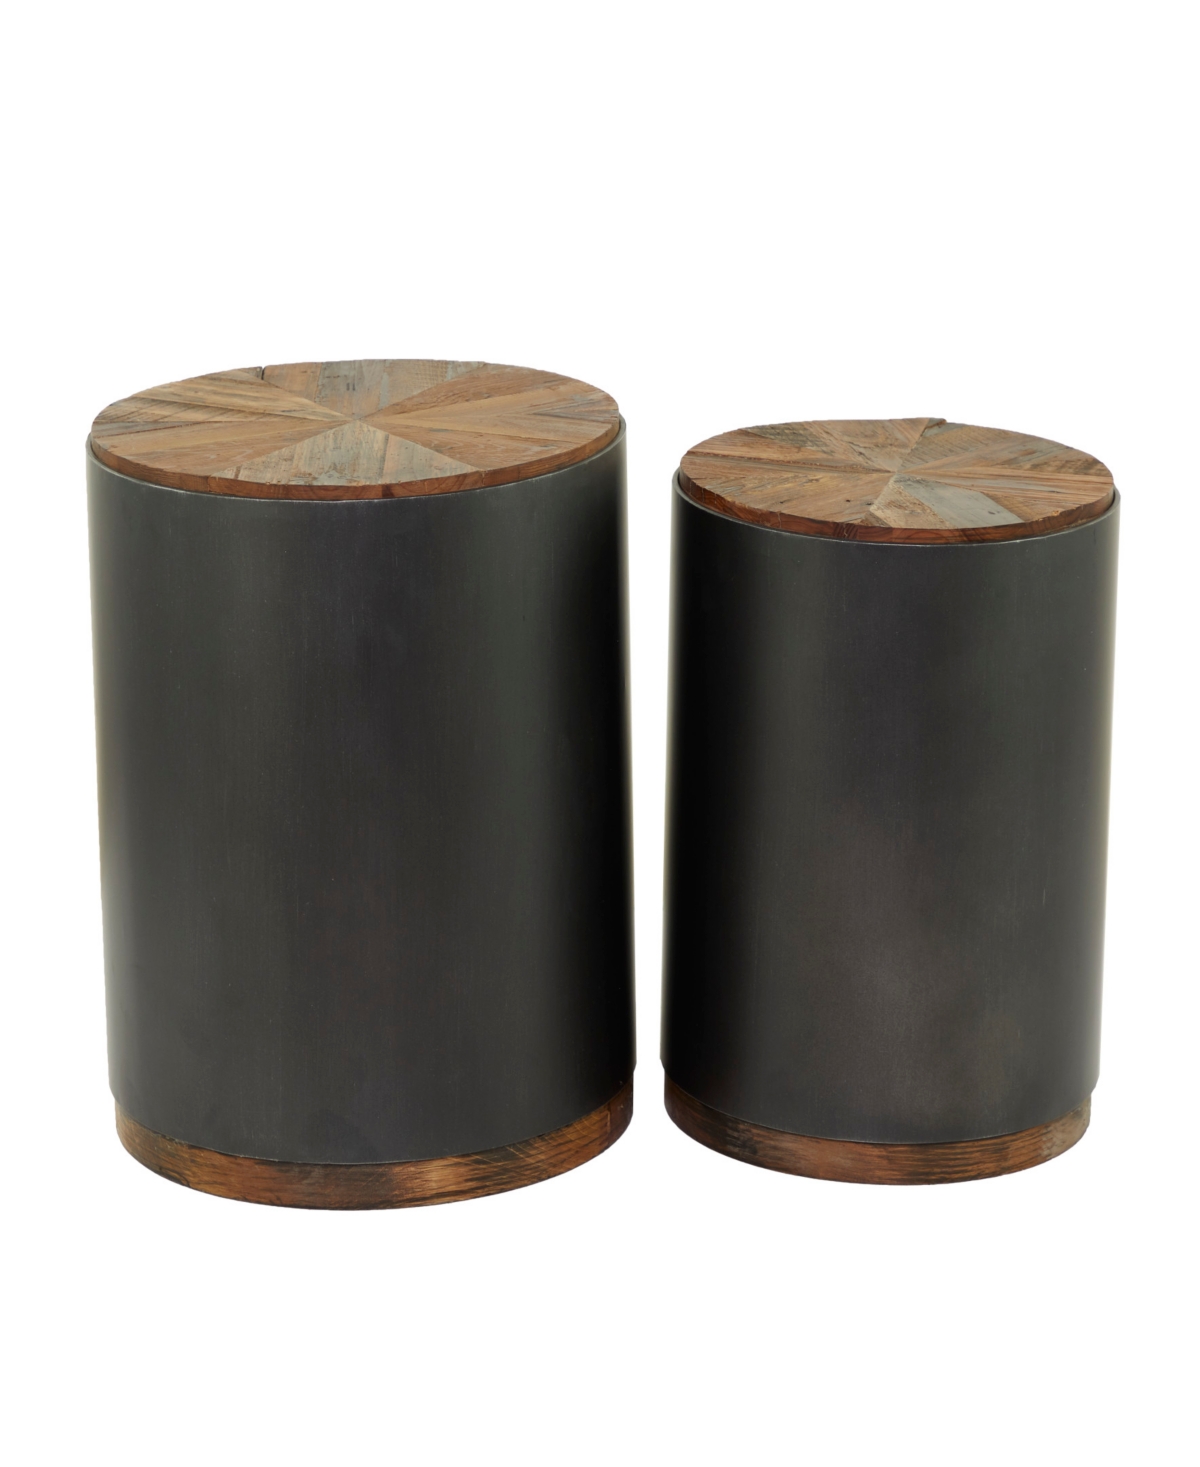 Rosemary Lane 21" And 19" Metal Rustic Accent Table With Brown Wood Top, Set Of 2 In Black